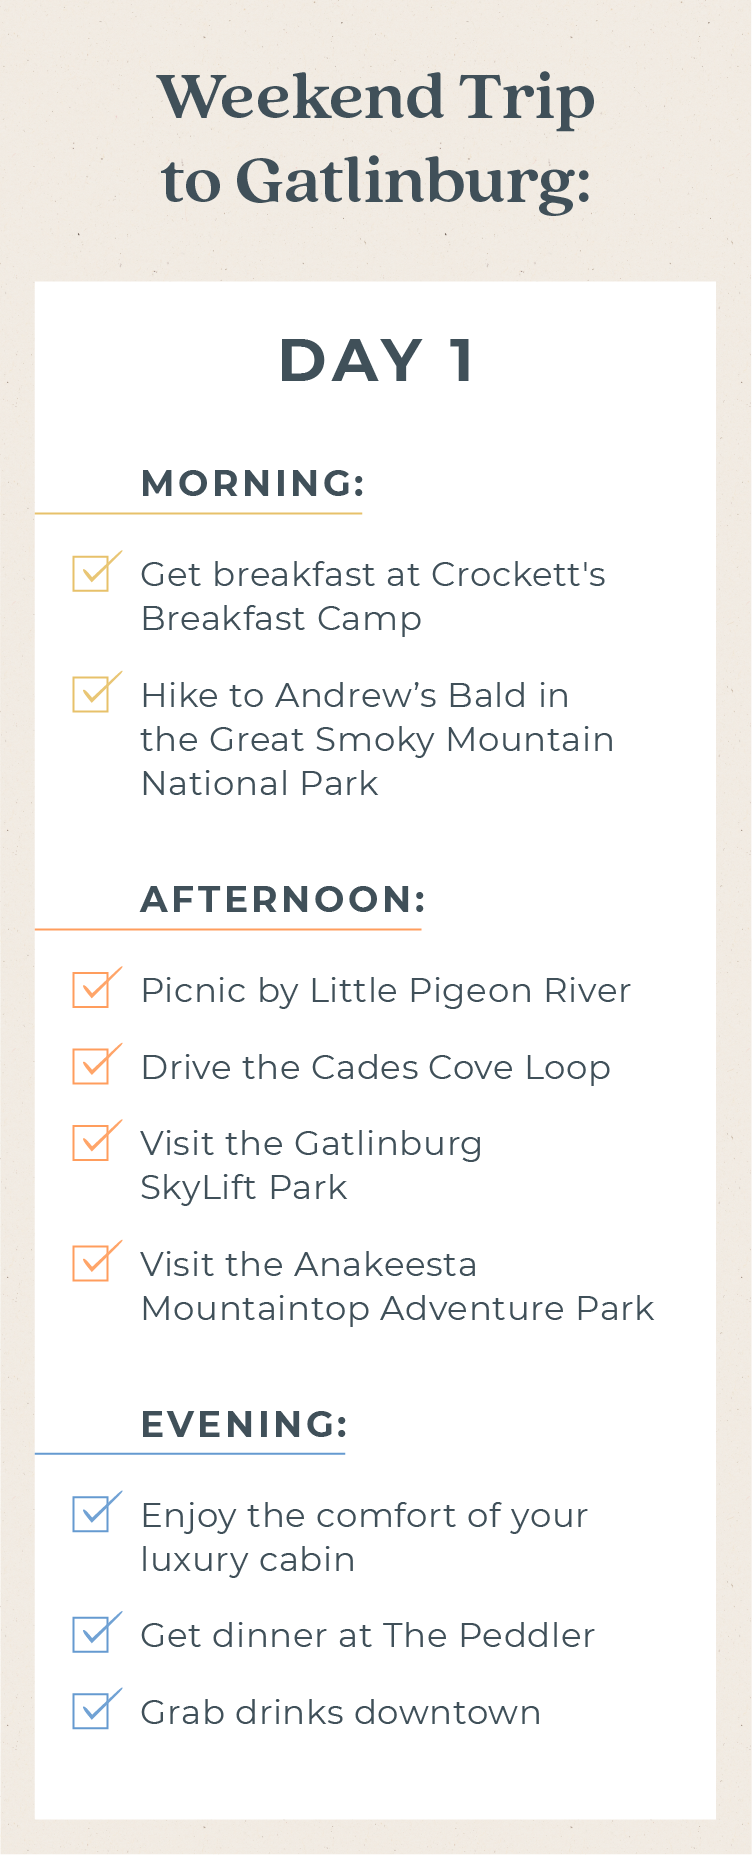 A graphic shares the day one itinerary for a weekend trip to Gatlinburg.